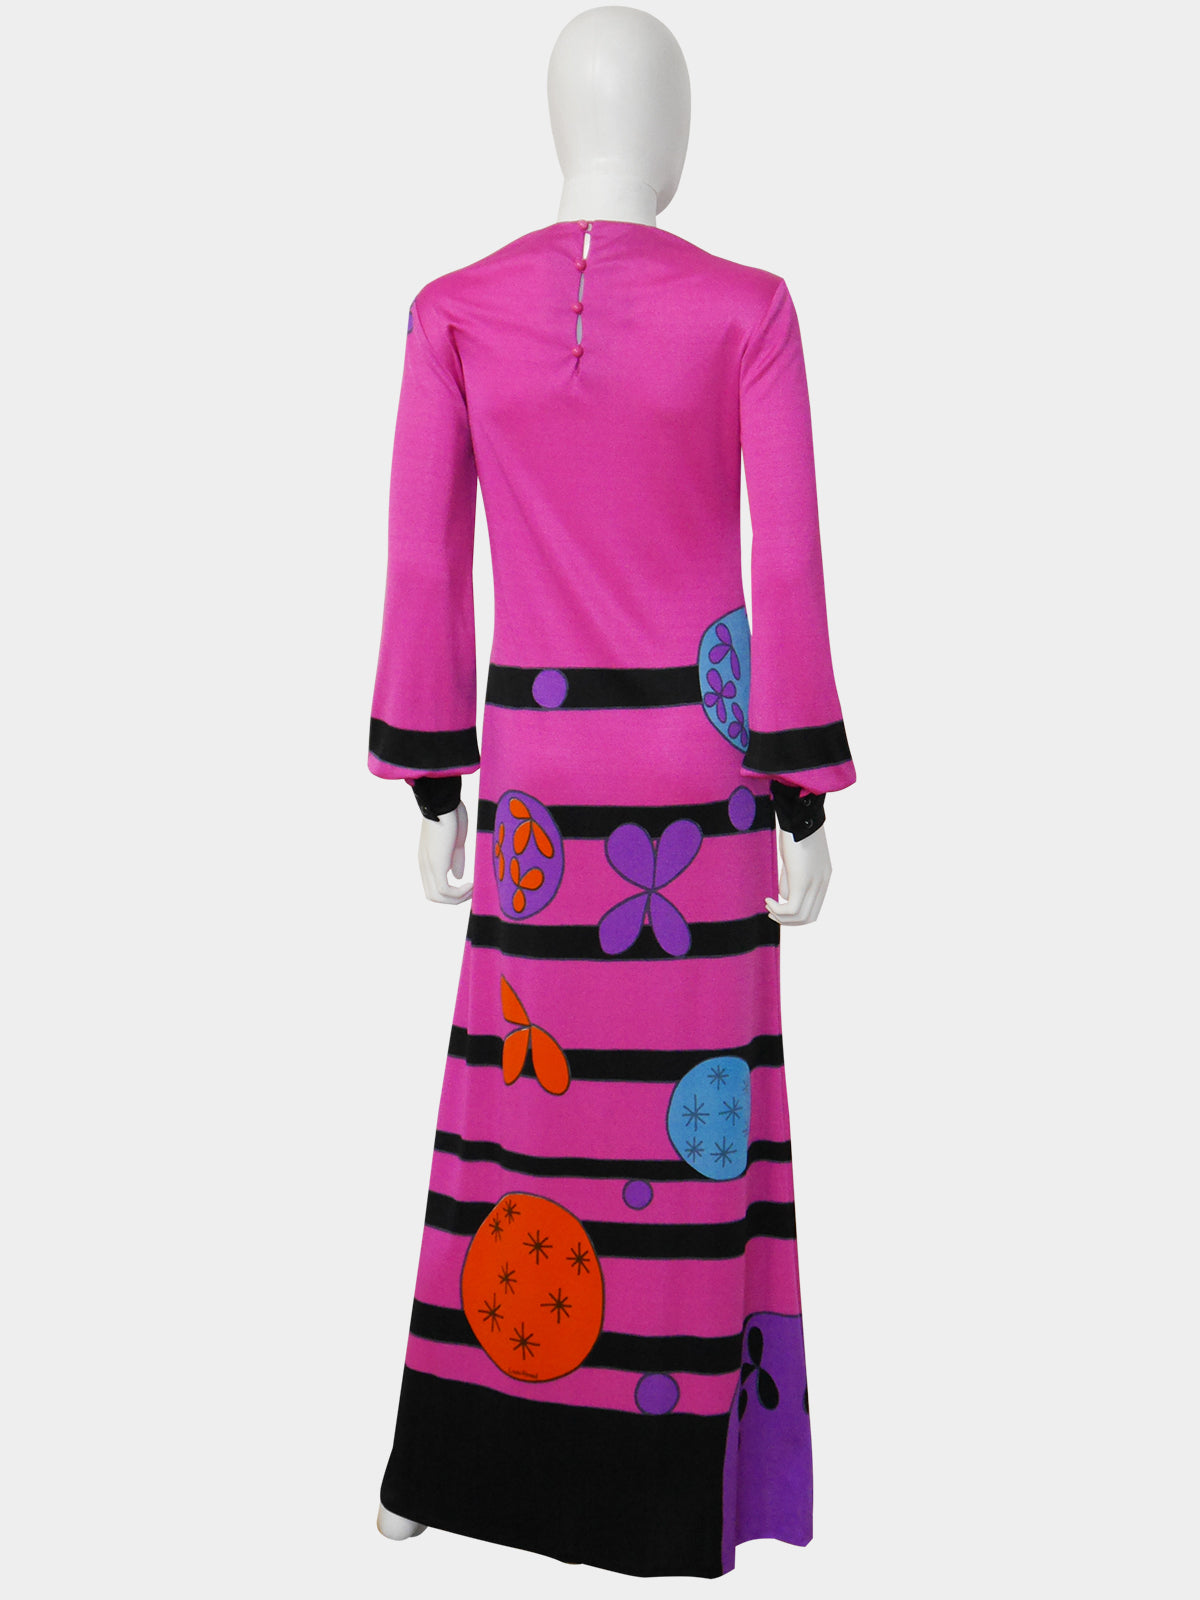 LOUIS FÉRAUD 1960s 1970s Vintage Magenta Pink Psychedelic Print Maxi Evening Dress Size S